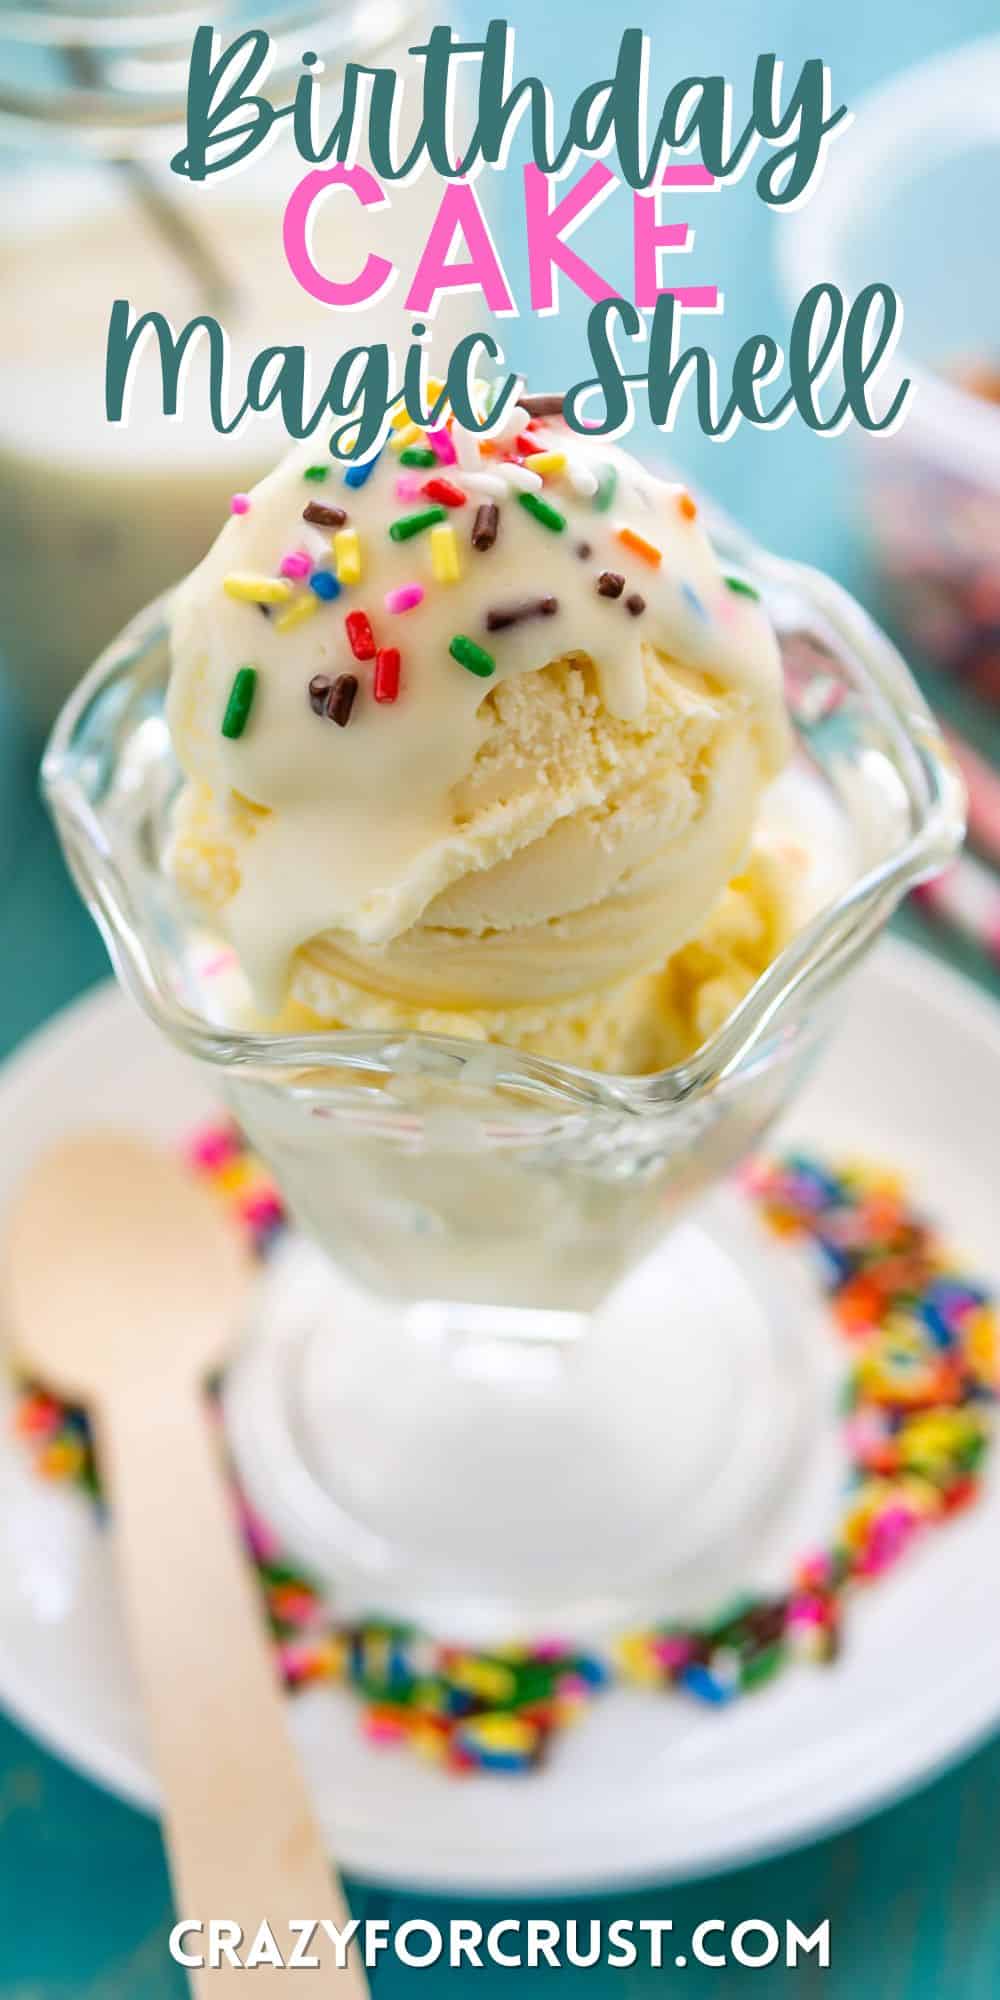 ice cream in a clear cup with white magic shell and sprinkles on top with words on the image.